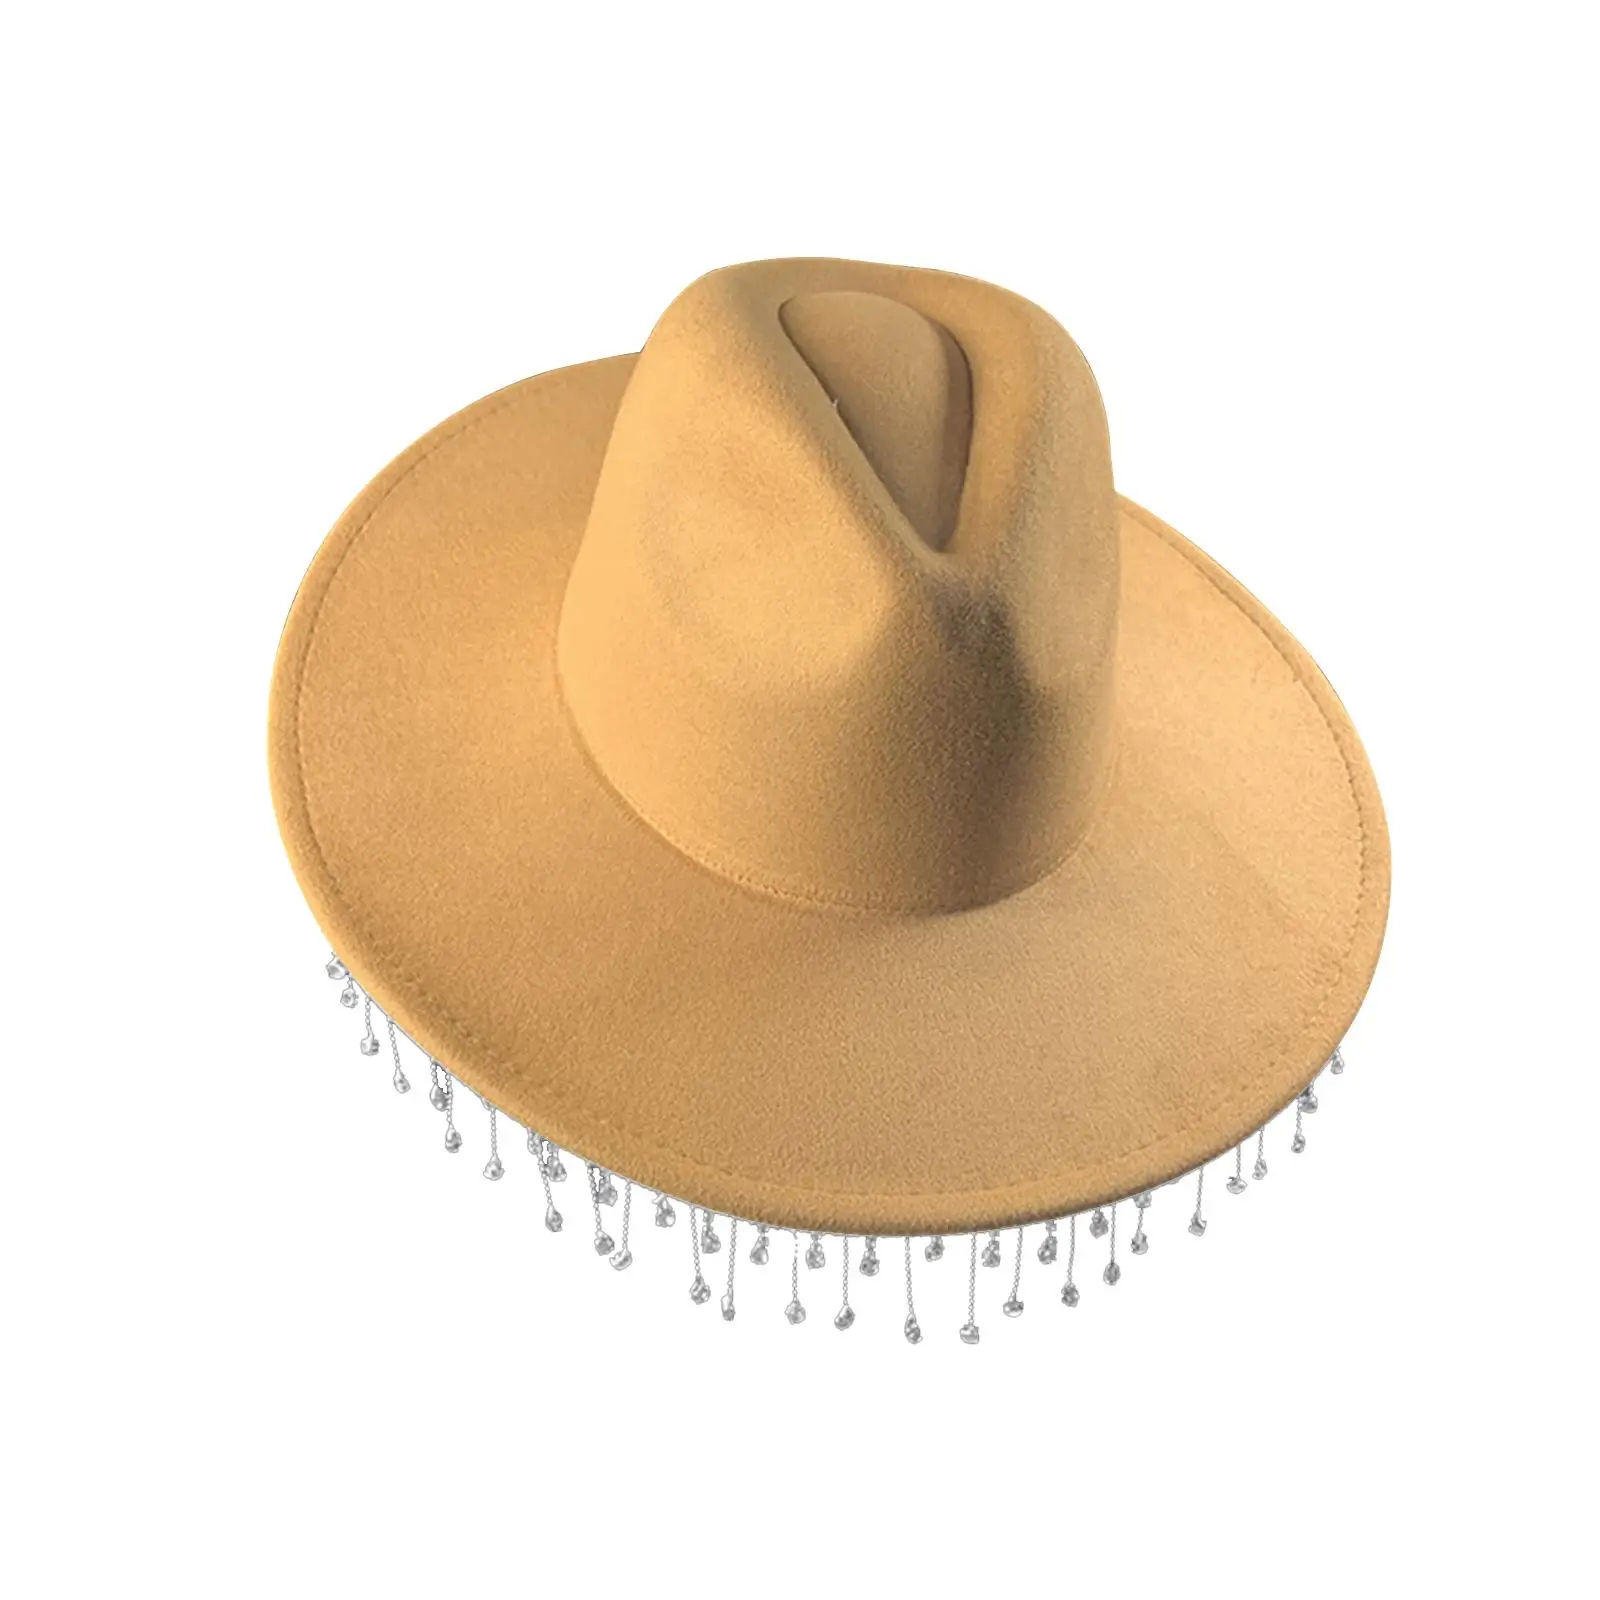 Western Style Felt Cowboy Hat Fedoras Caps Cowgirl Jazz Caps Sunhat with Tassel for Outdoor Holiday Costume Clothes Accessories